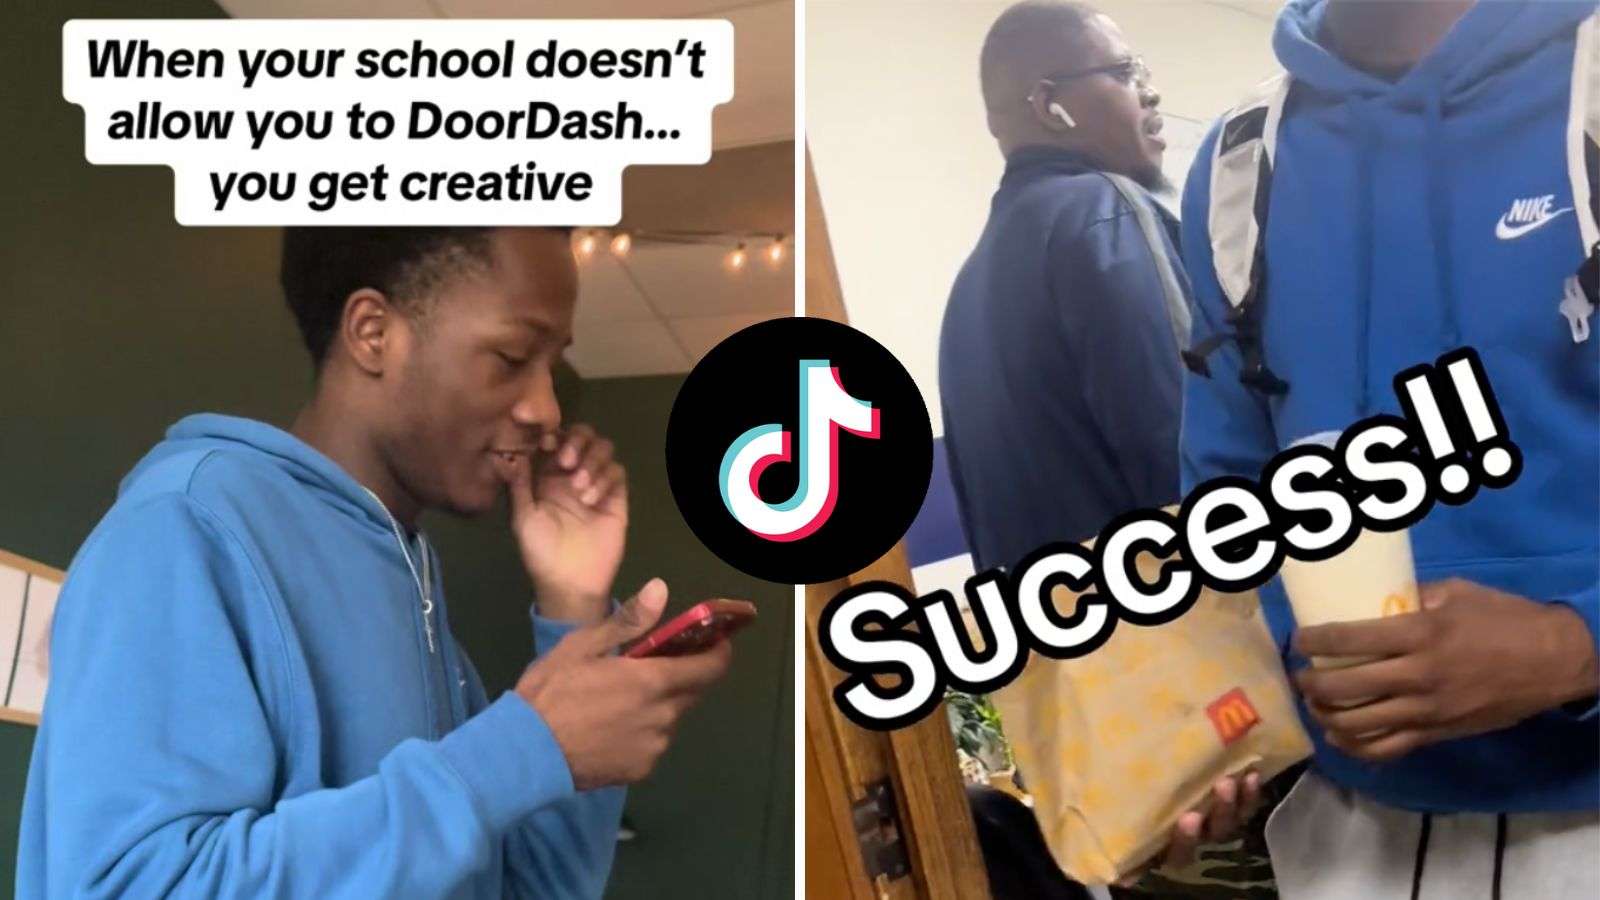 Student goes viral with clever way to DoorDash at school